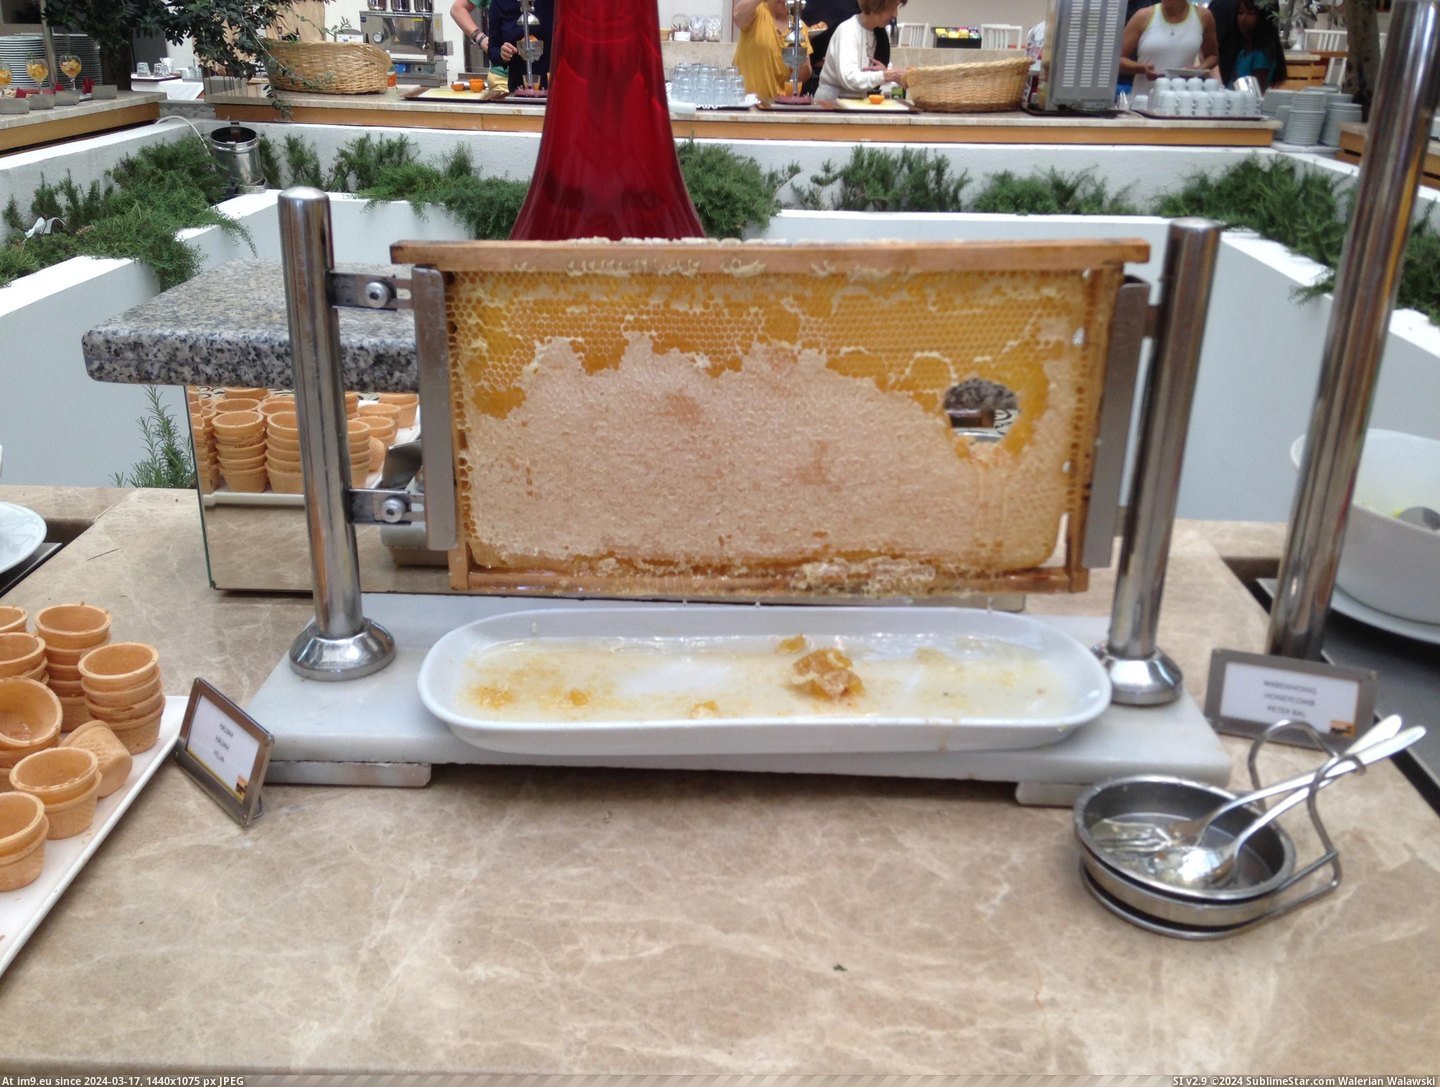 #Hotel #Honey #Honeycomb #Served [Mildlyinteresting] In my hotel the honey is served directly from the honeycomb Pic. (Obraz z album My r/MILDLYINTERESTING favs))